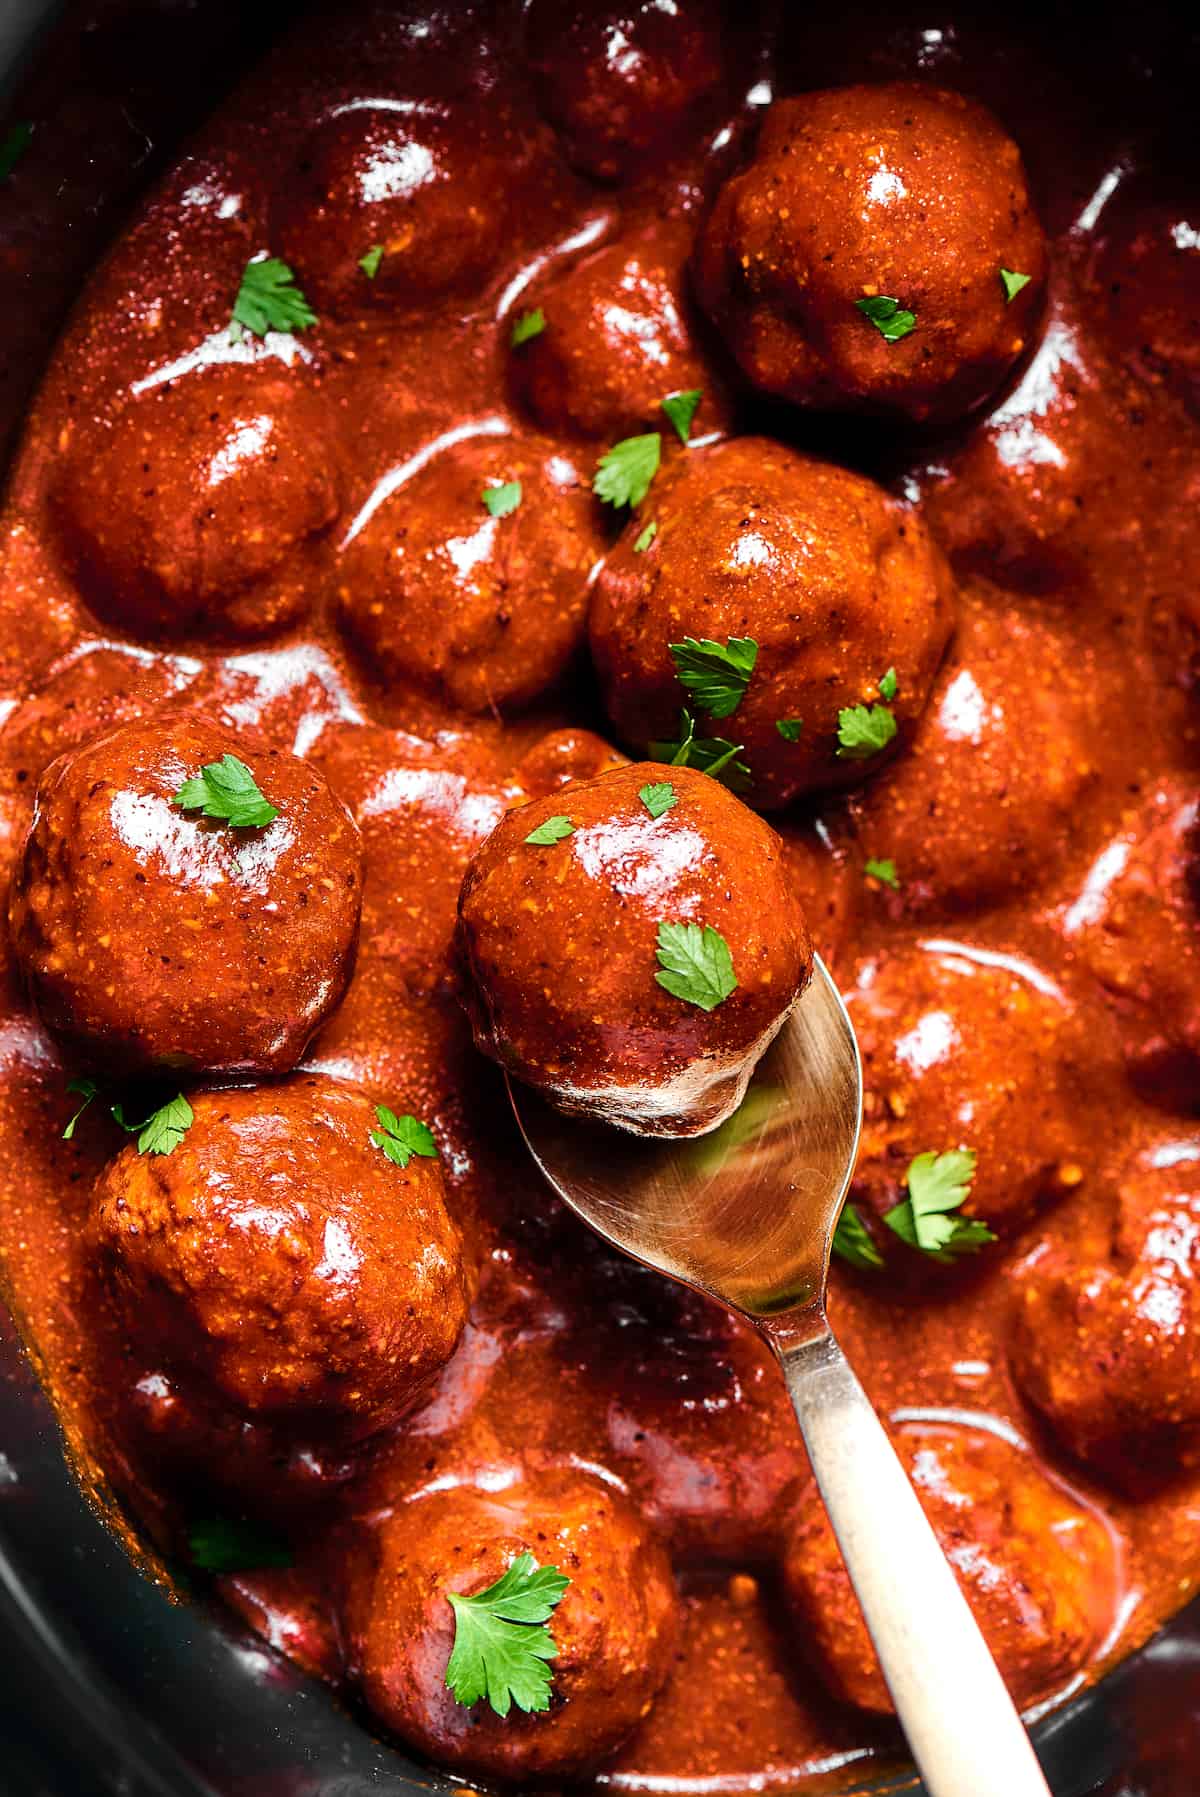 Meatballs in sauce, sprinkled with parsley.